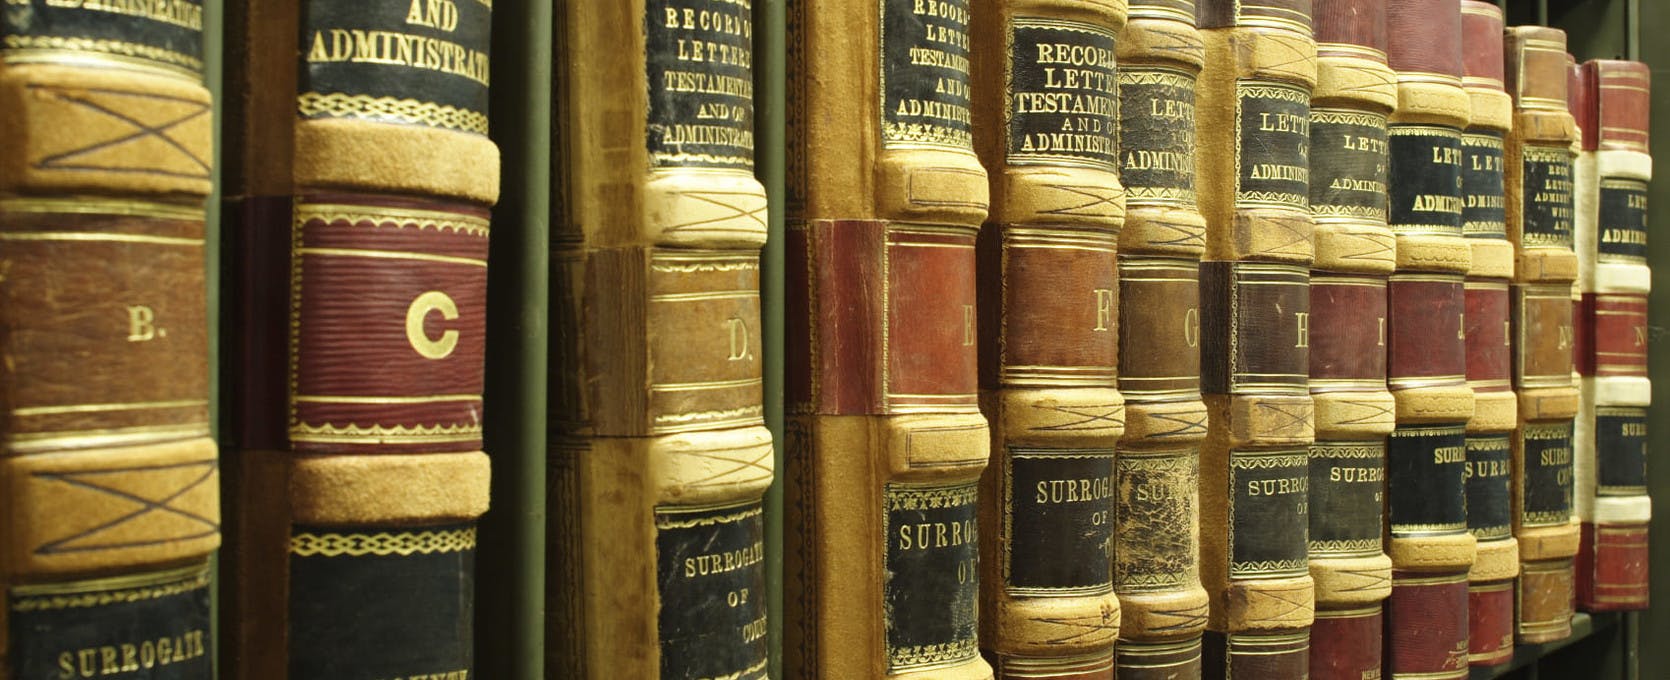 Old law books on a shelf